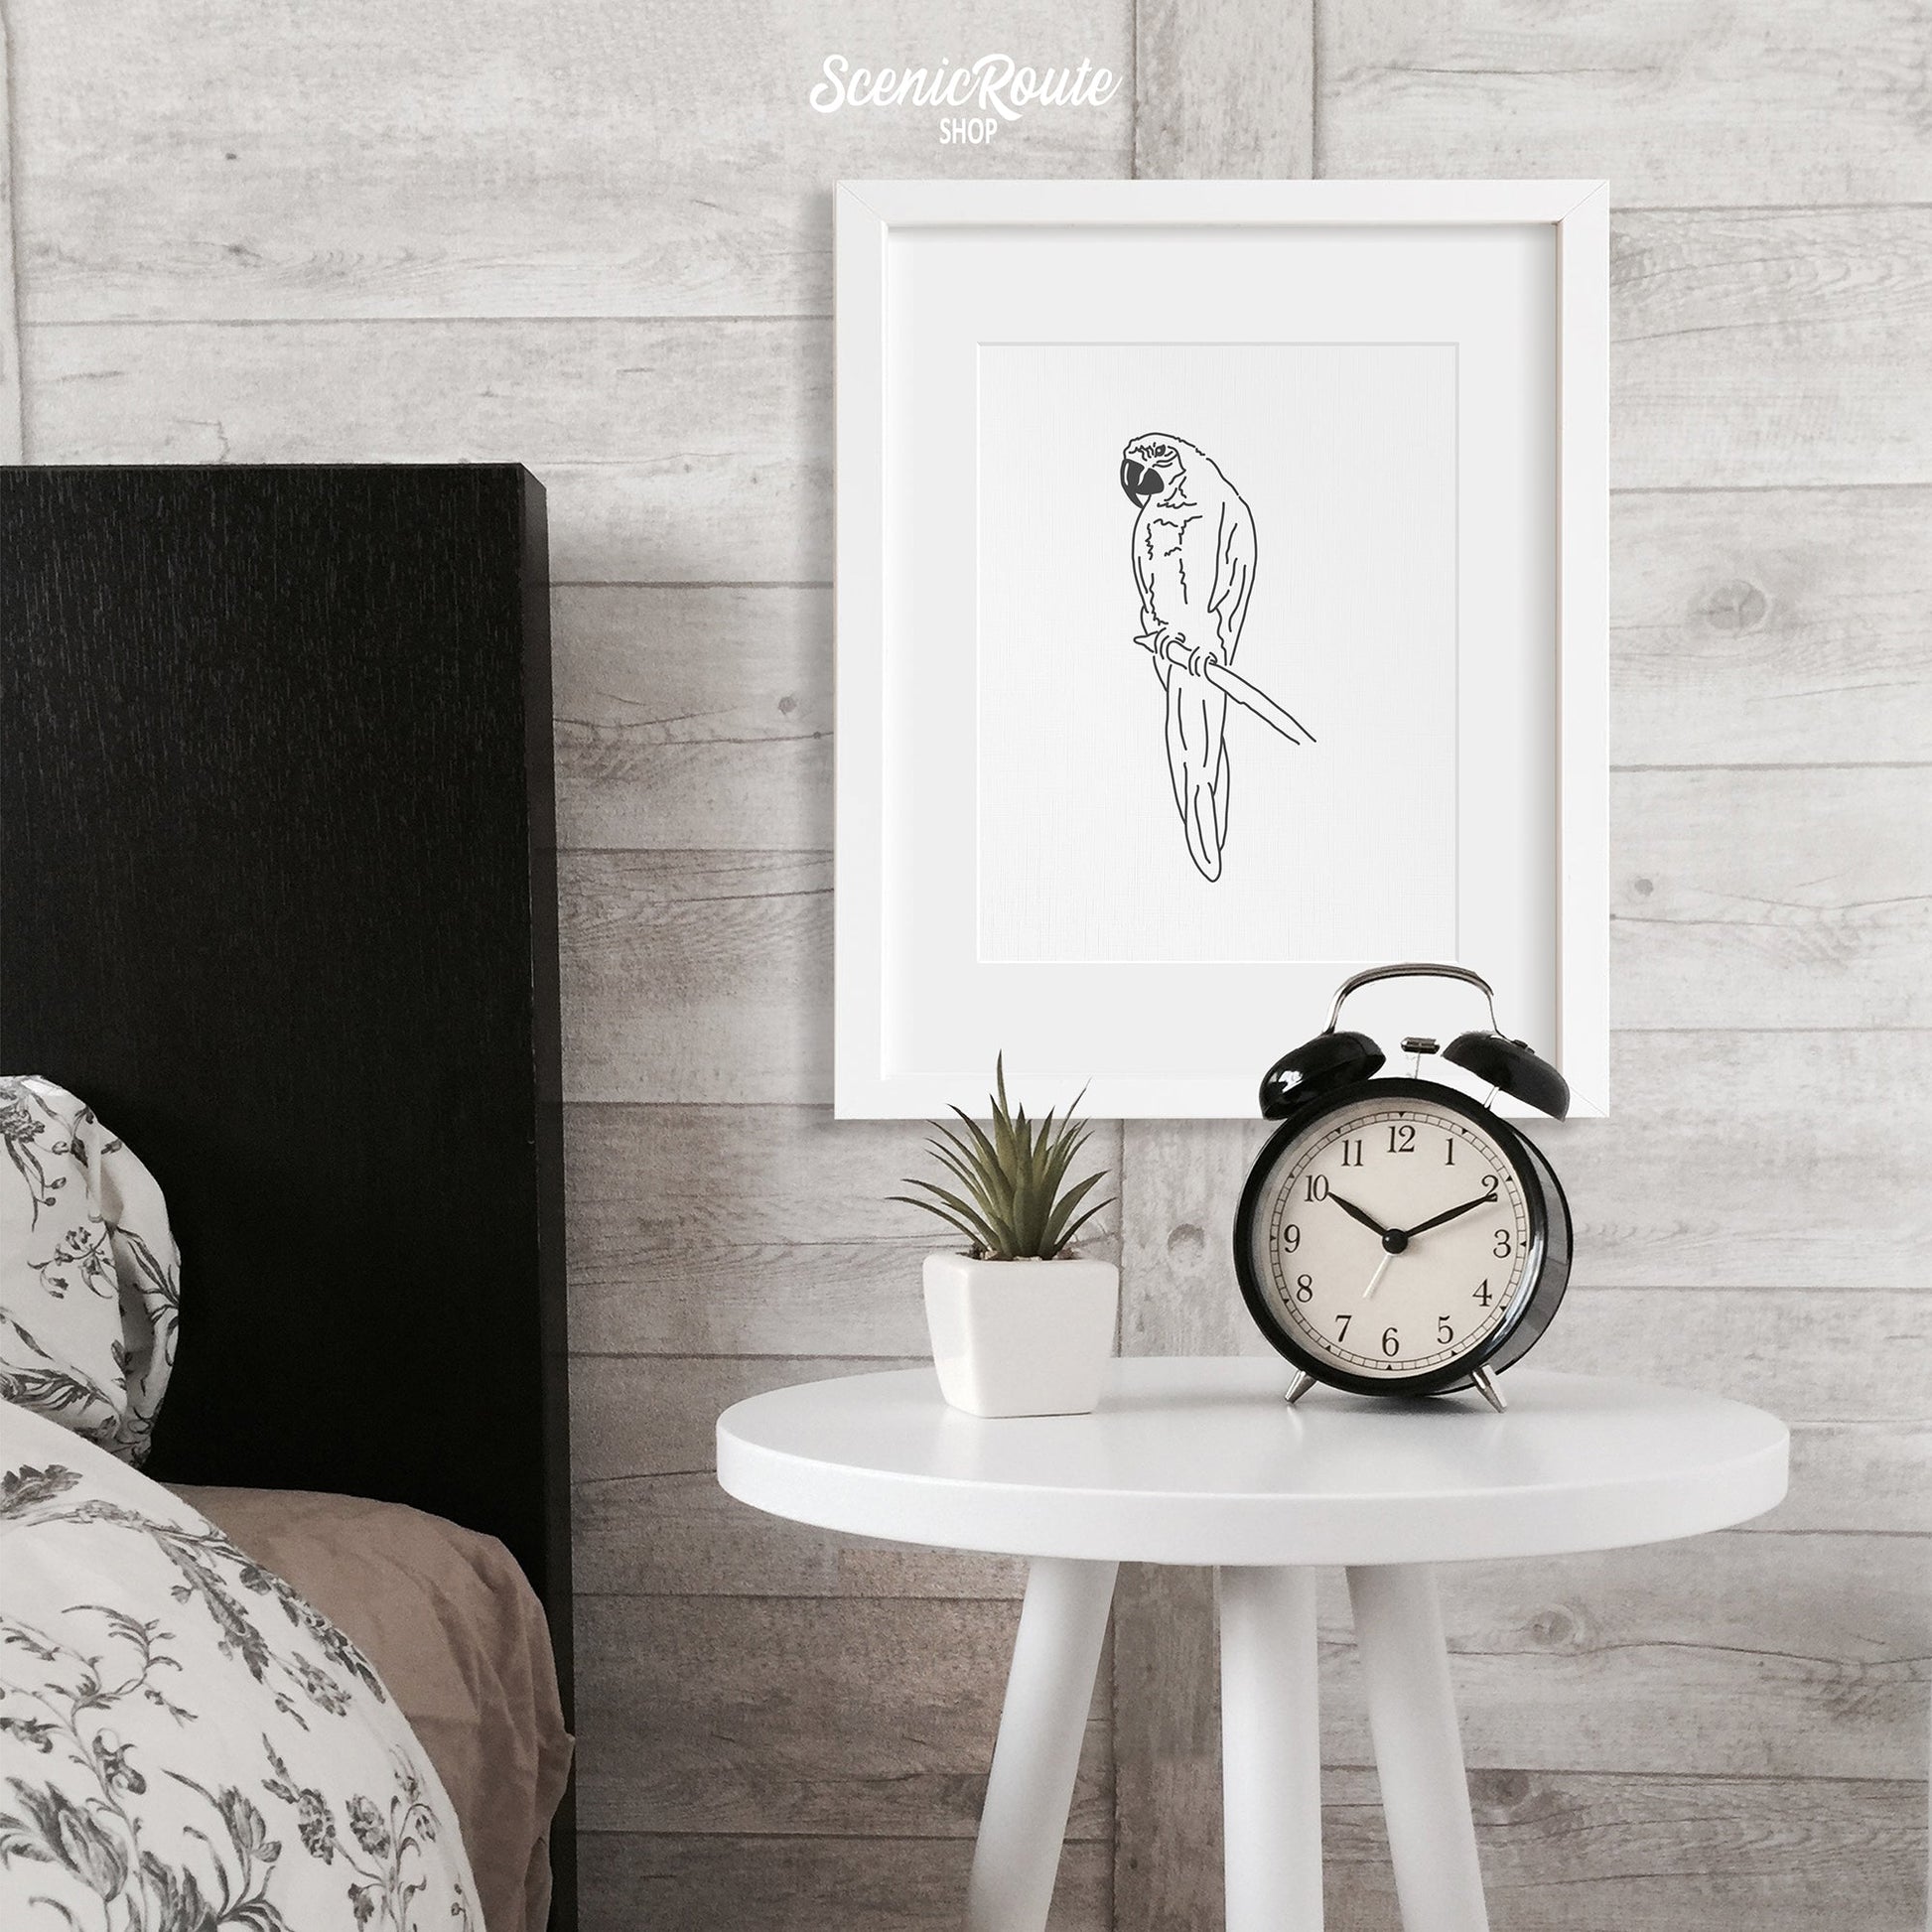 A framed line art drawing of a Parrot above a nightstand next to a bed